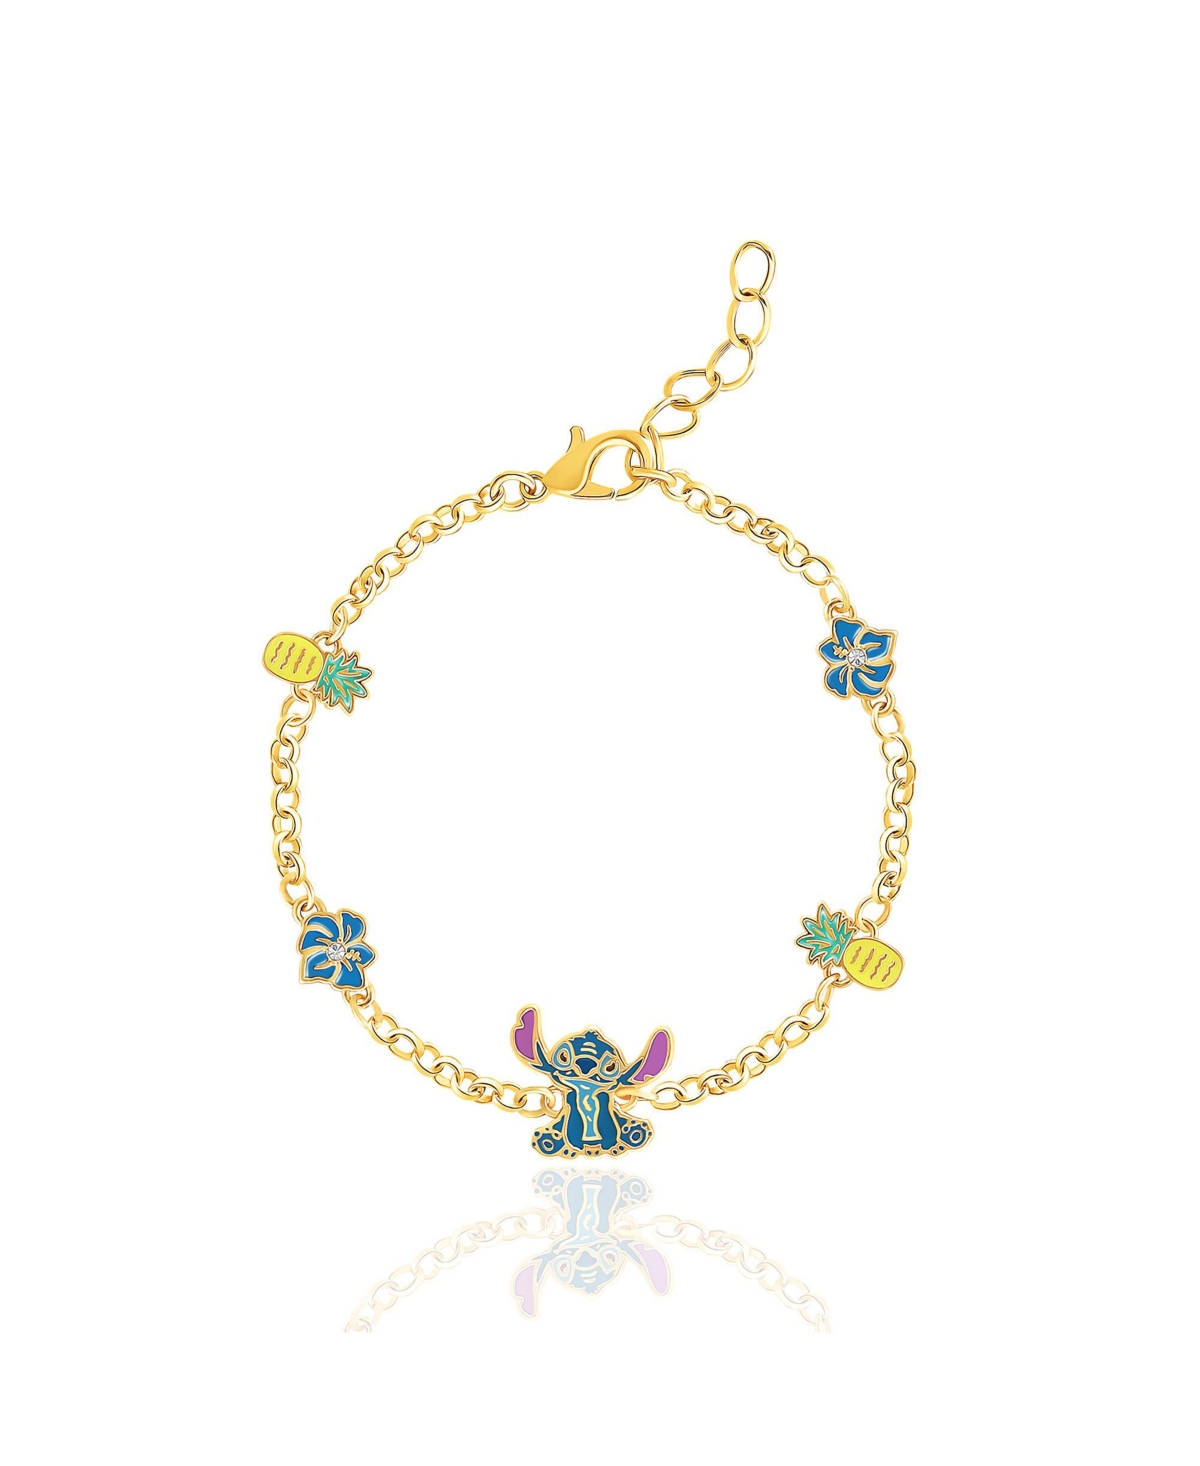 Womens Stitch Bracelet with Station Pendants 6.5" + 1" - Gold Plated Stitch Jewelry Officially Licensed - Gold tone, blue